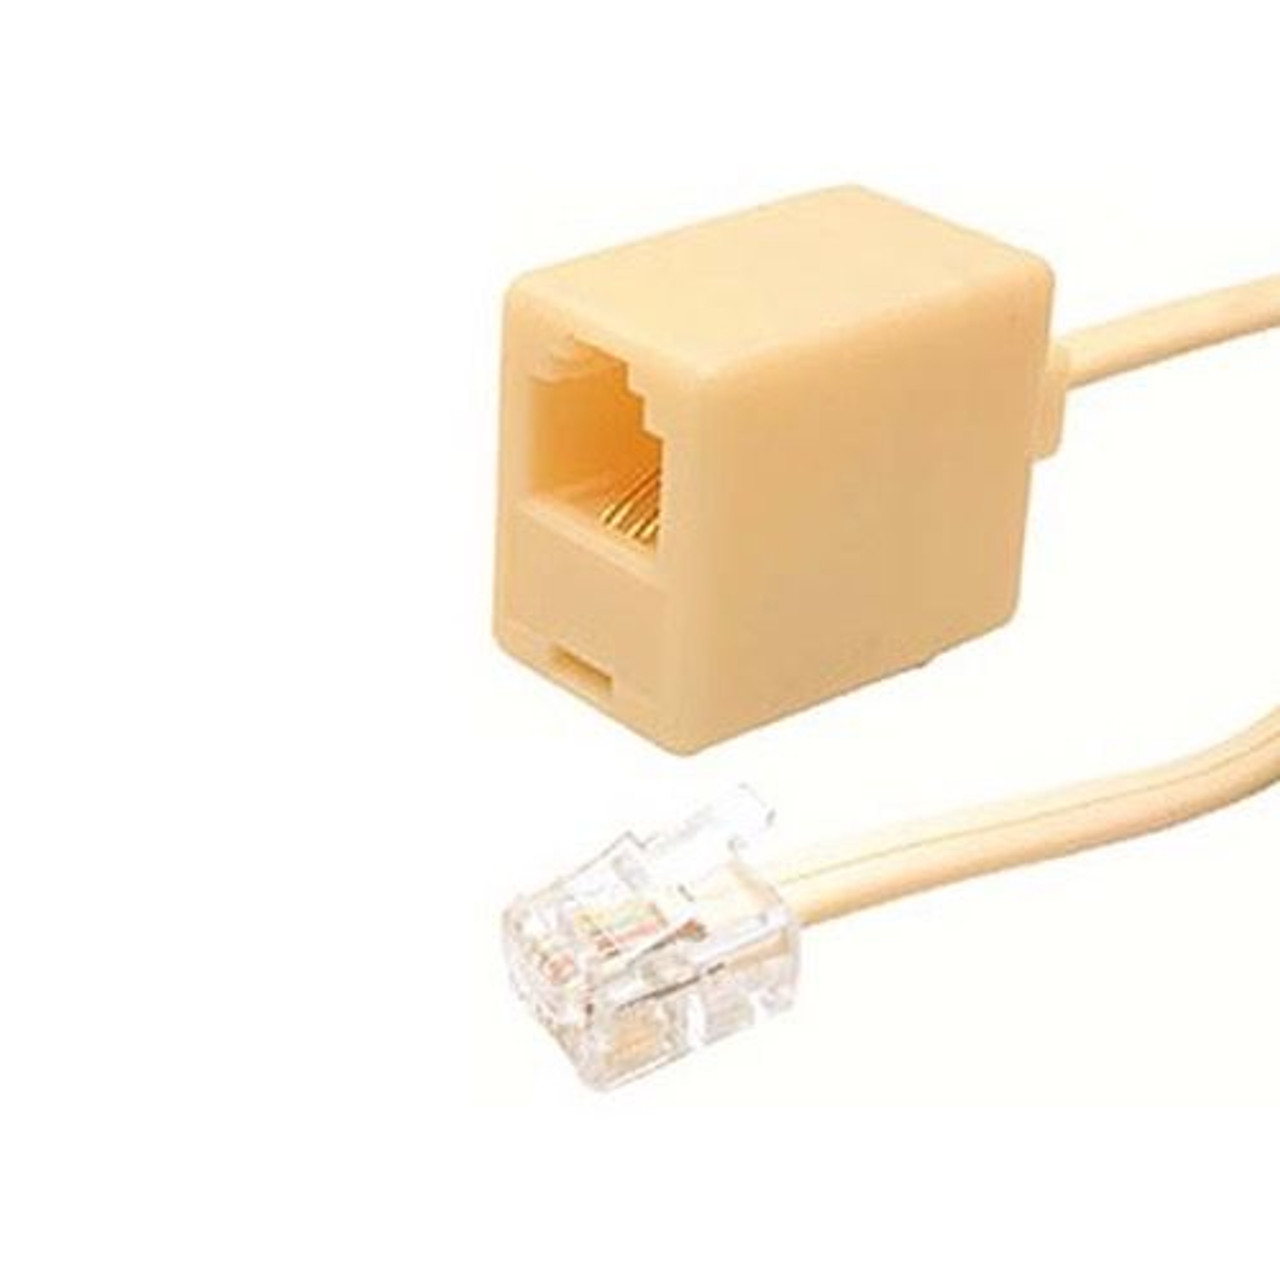 Steren 304-225IV 25 FT Telephone Extension Cord Cable Female To Male RJ11 4-Conductor Line Modulator Ivory 4-Wire Plug to Jack Line Cord 6P4C RJ11 Phone